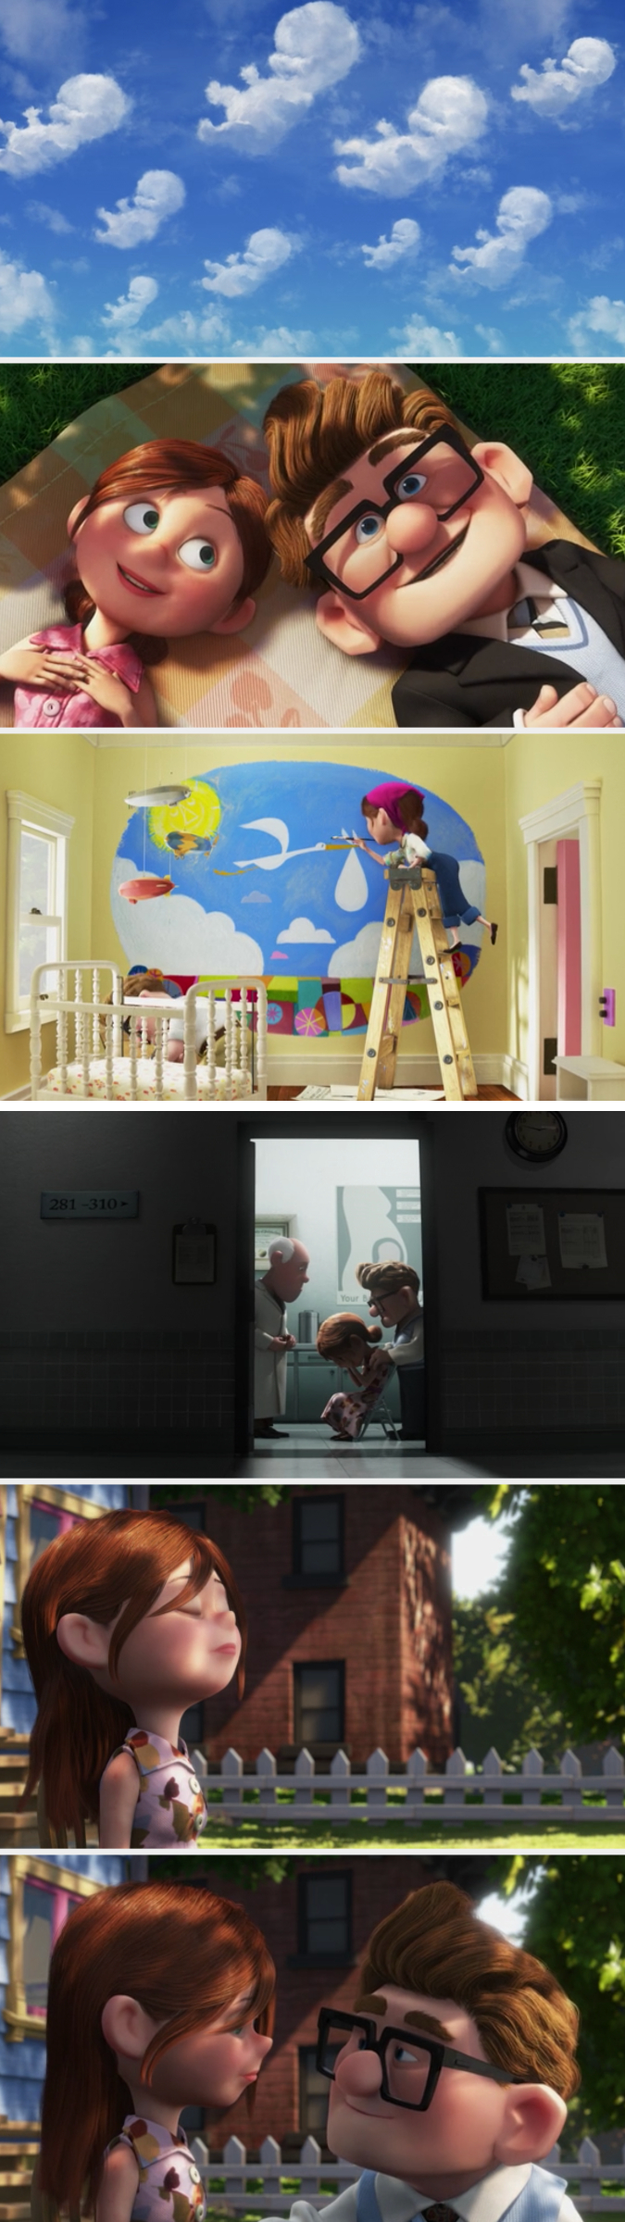 Screen shots from &quot;Up&quot;